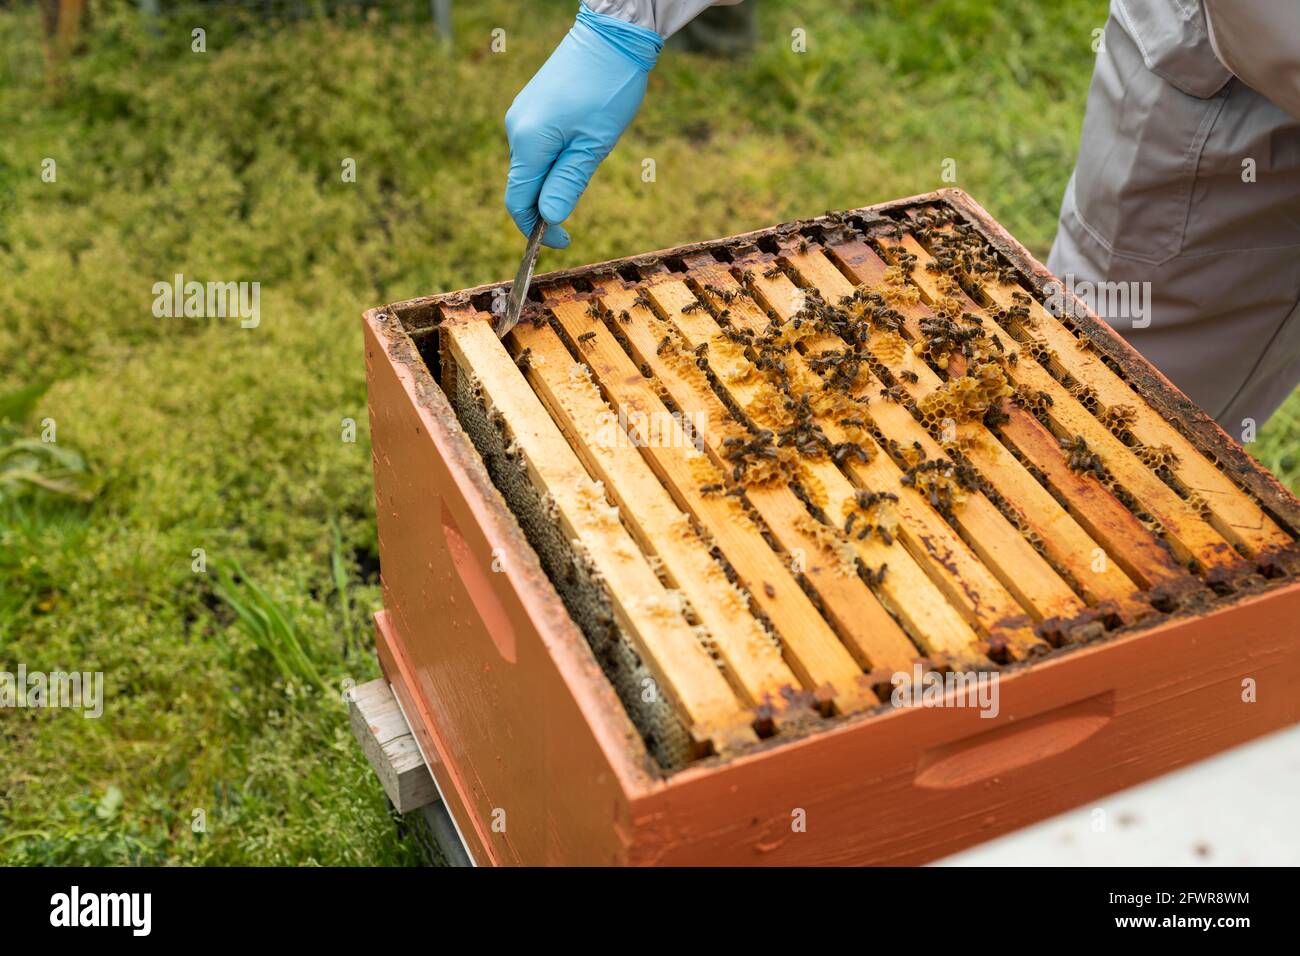 View of a brood box in a bee hive, looking at a bee brood frame, beekeeping session teaching apiary, inspecting a hive Stock Photo